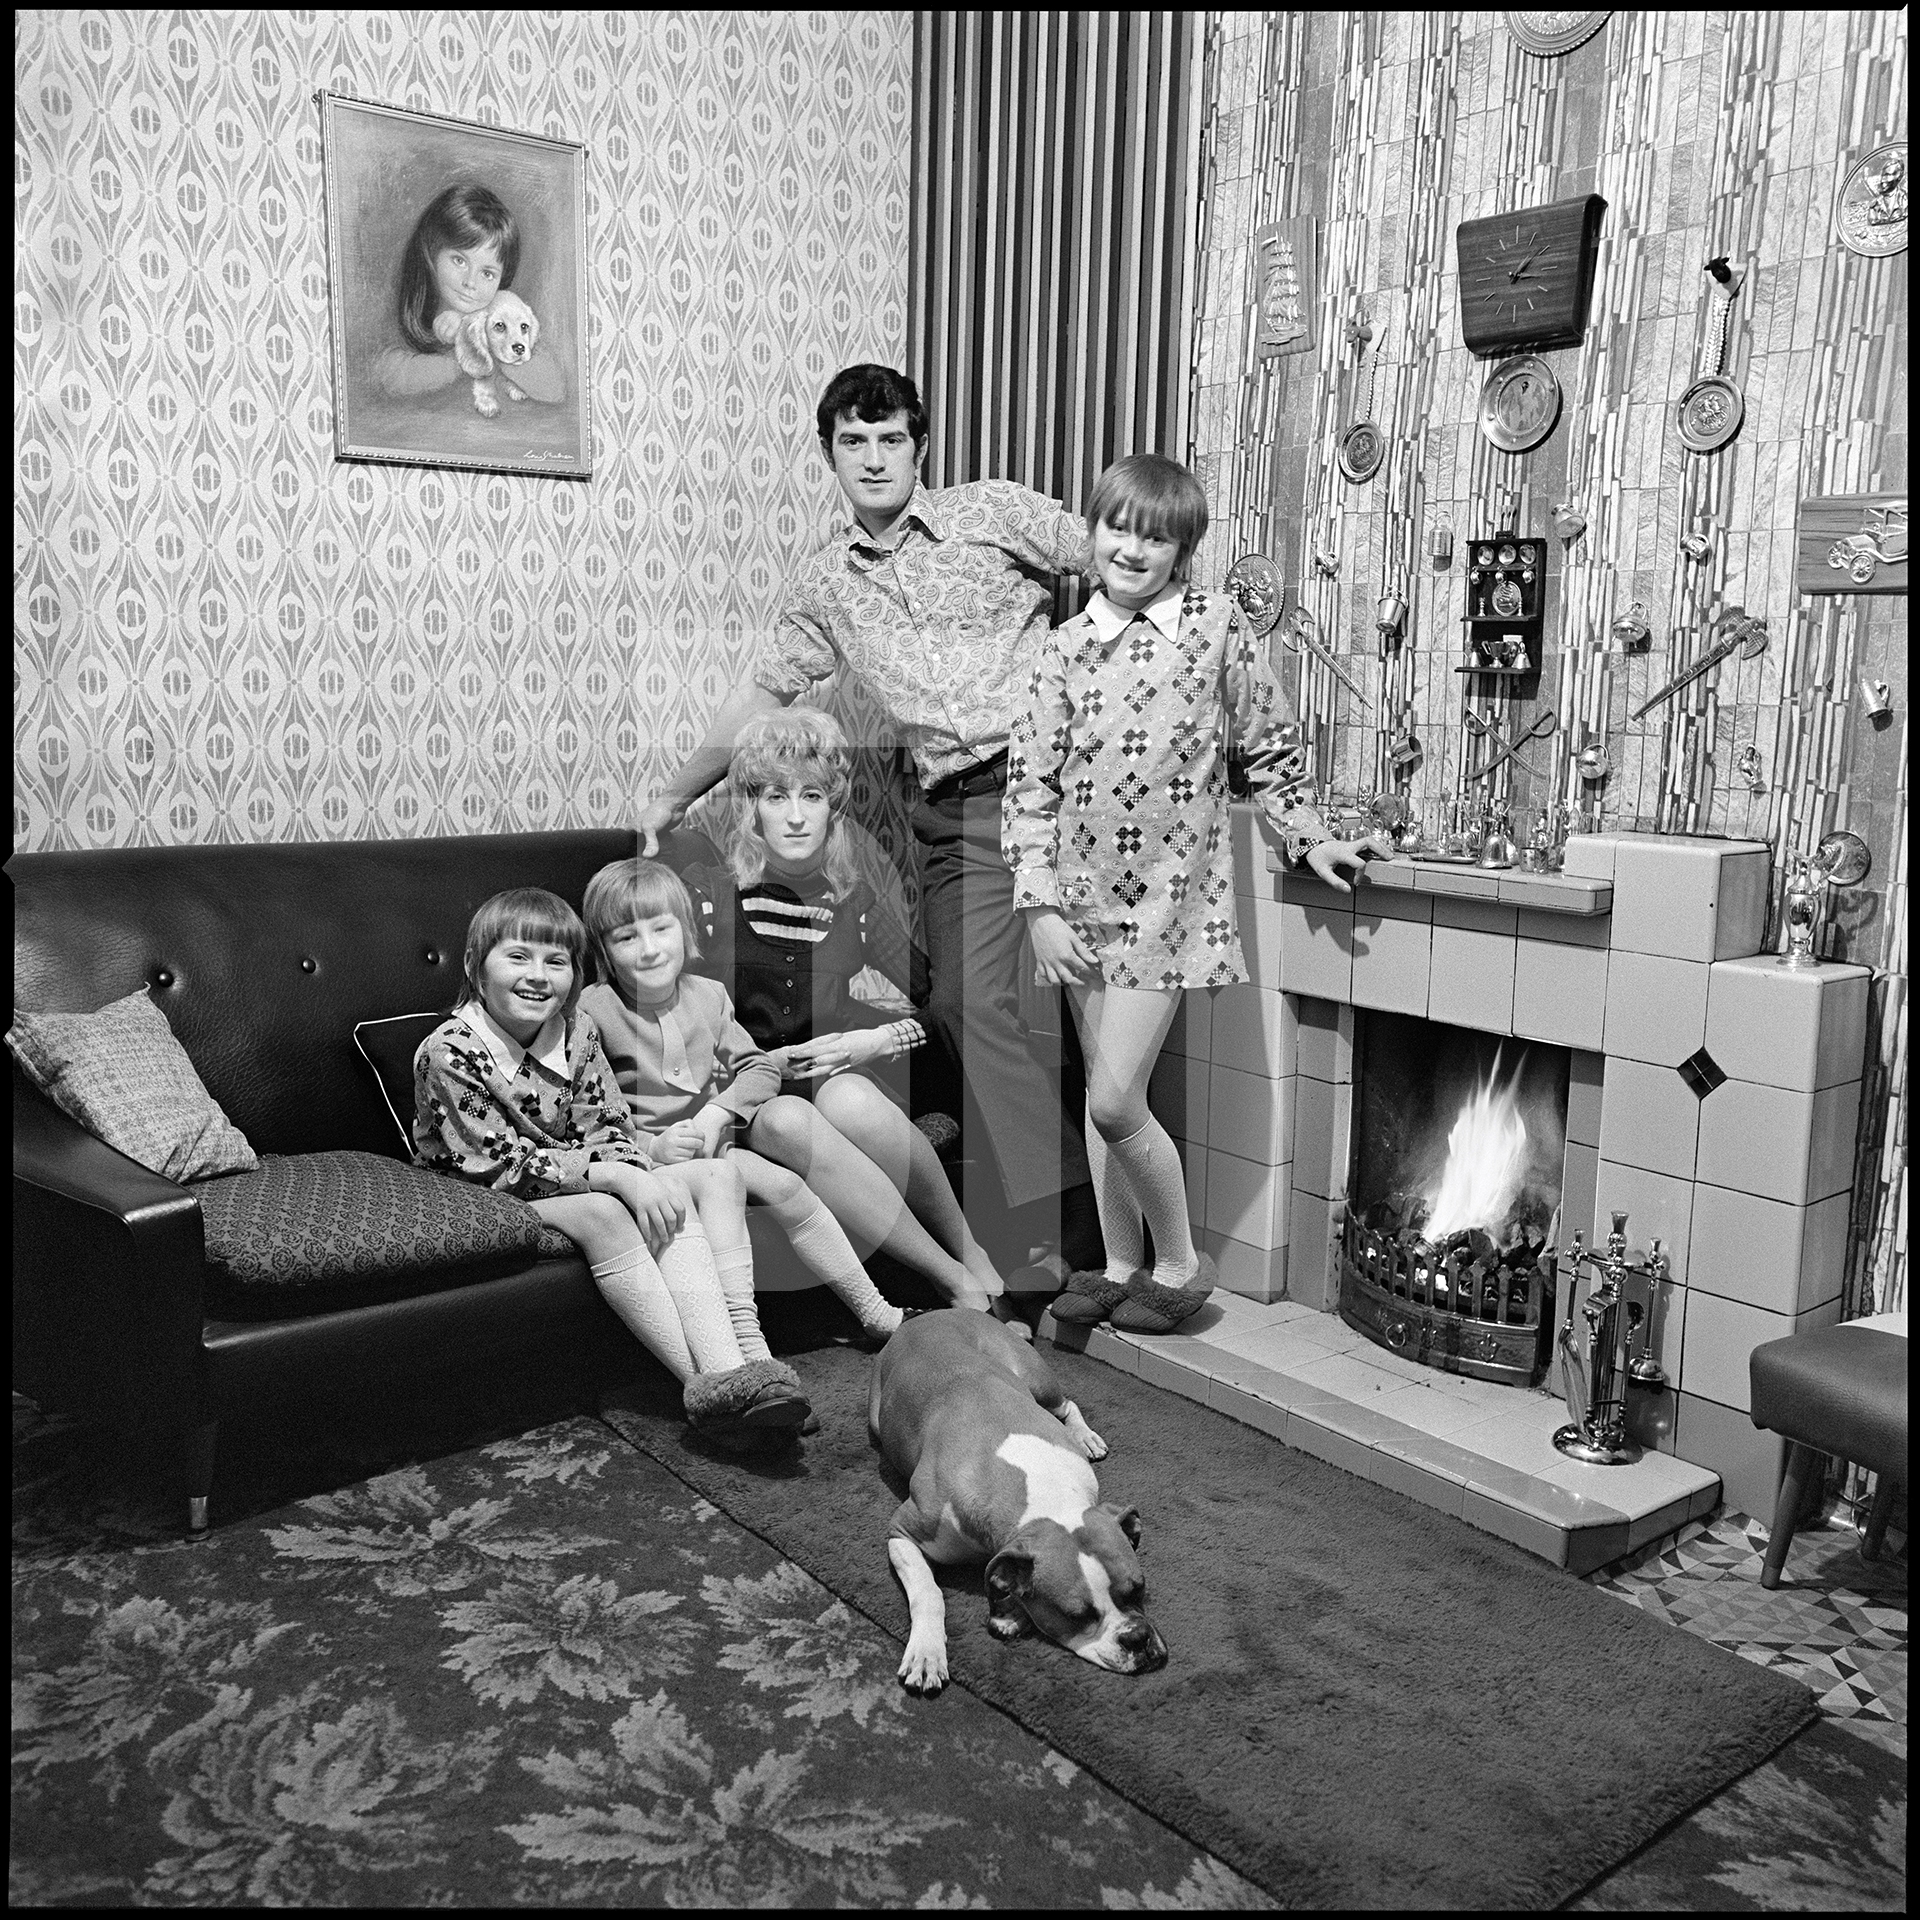 Jacqueline, Barbara, Joan, Alan and Kim. The Craddock family, residents of June Street, Salford. 1973 by Daniel Meadows